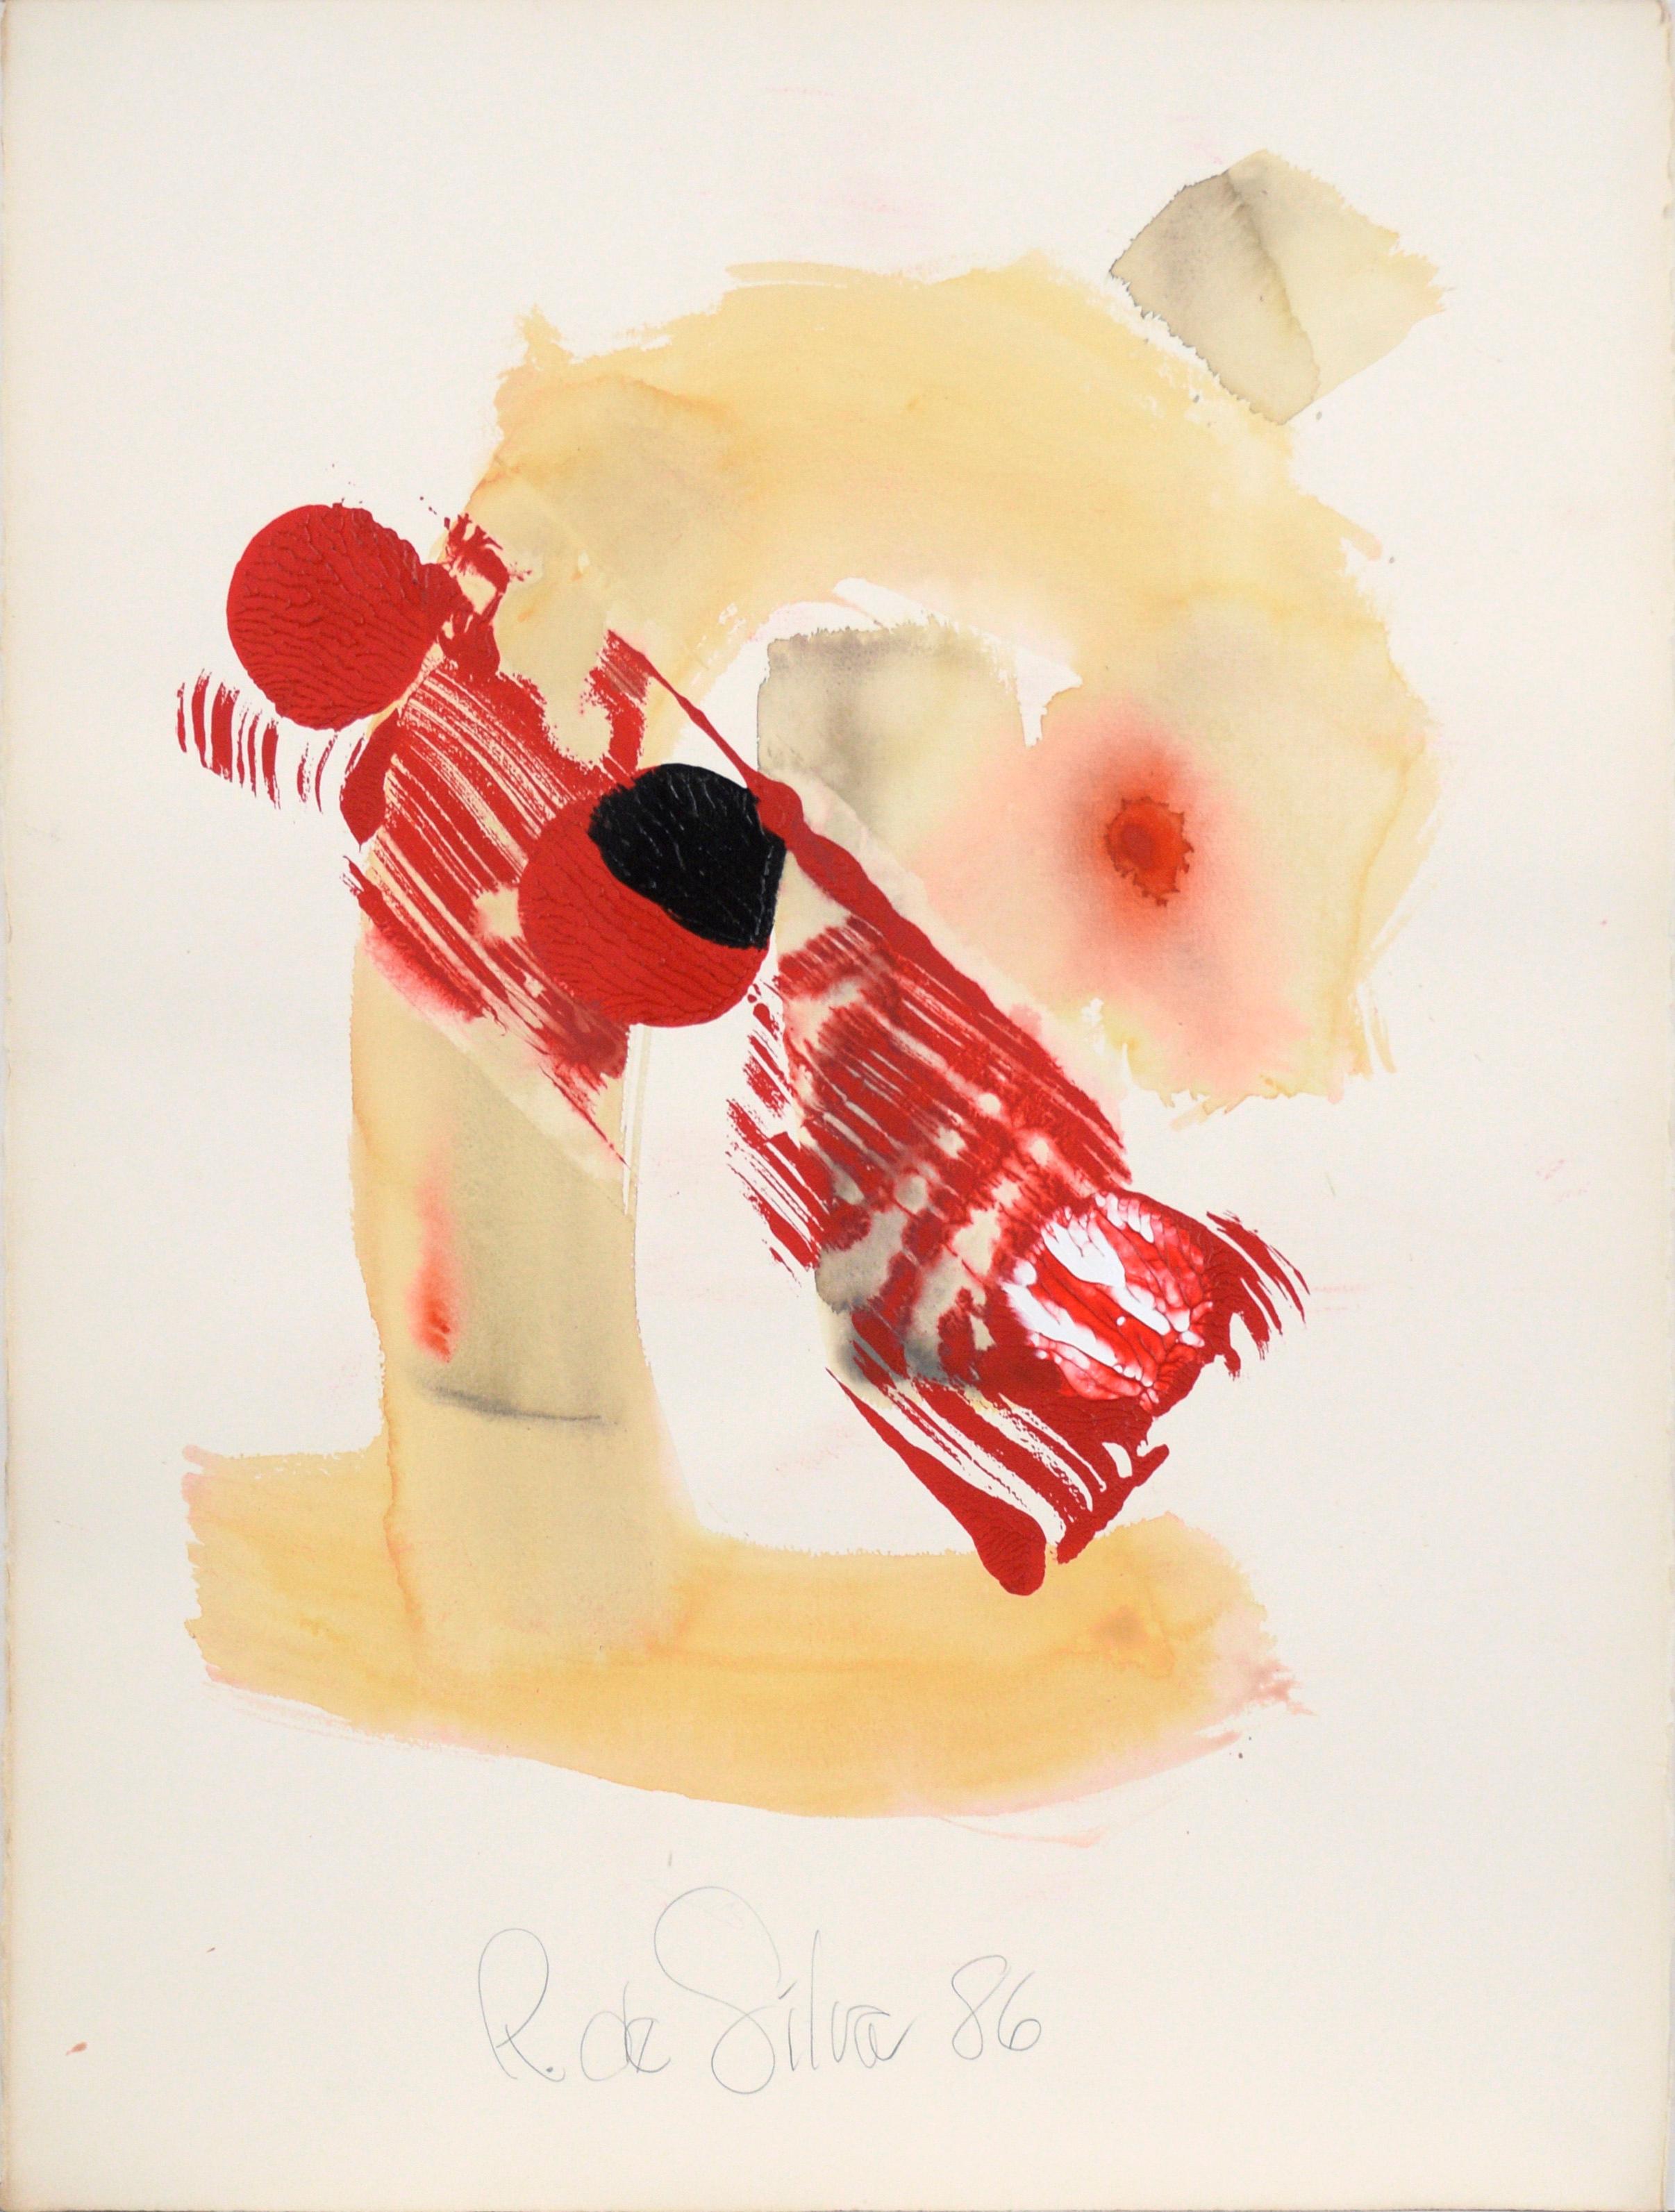 Ricardo de Silva Abstract Painting - Red Strike - Abstract Expressionist Composition in Acrylic on Paper